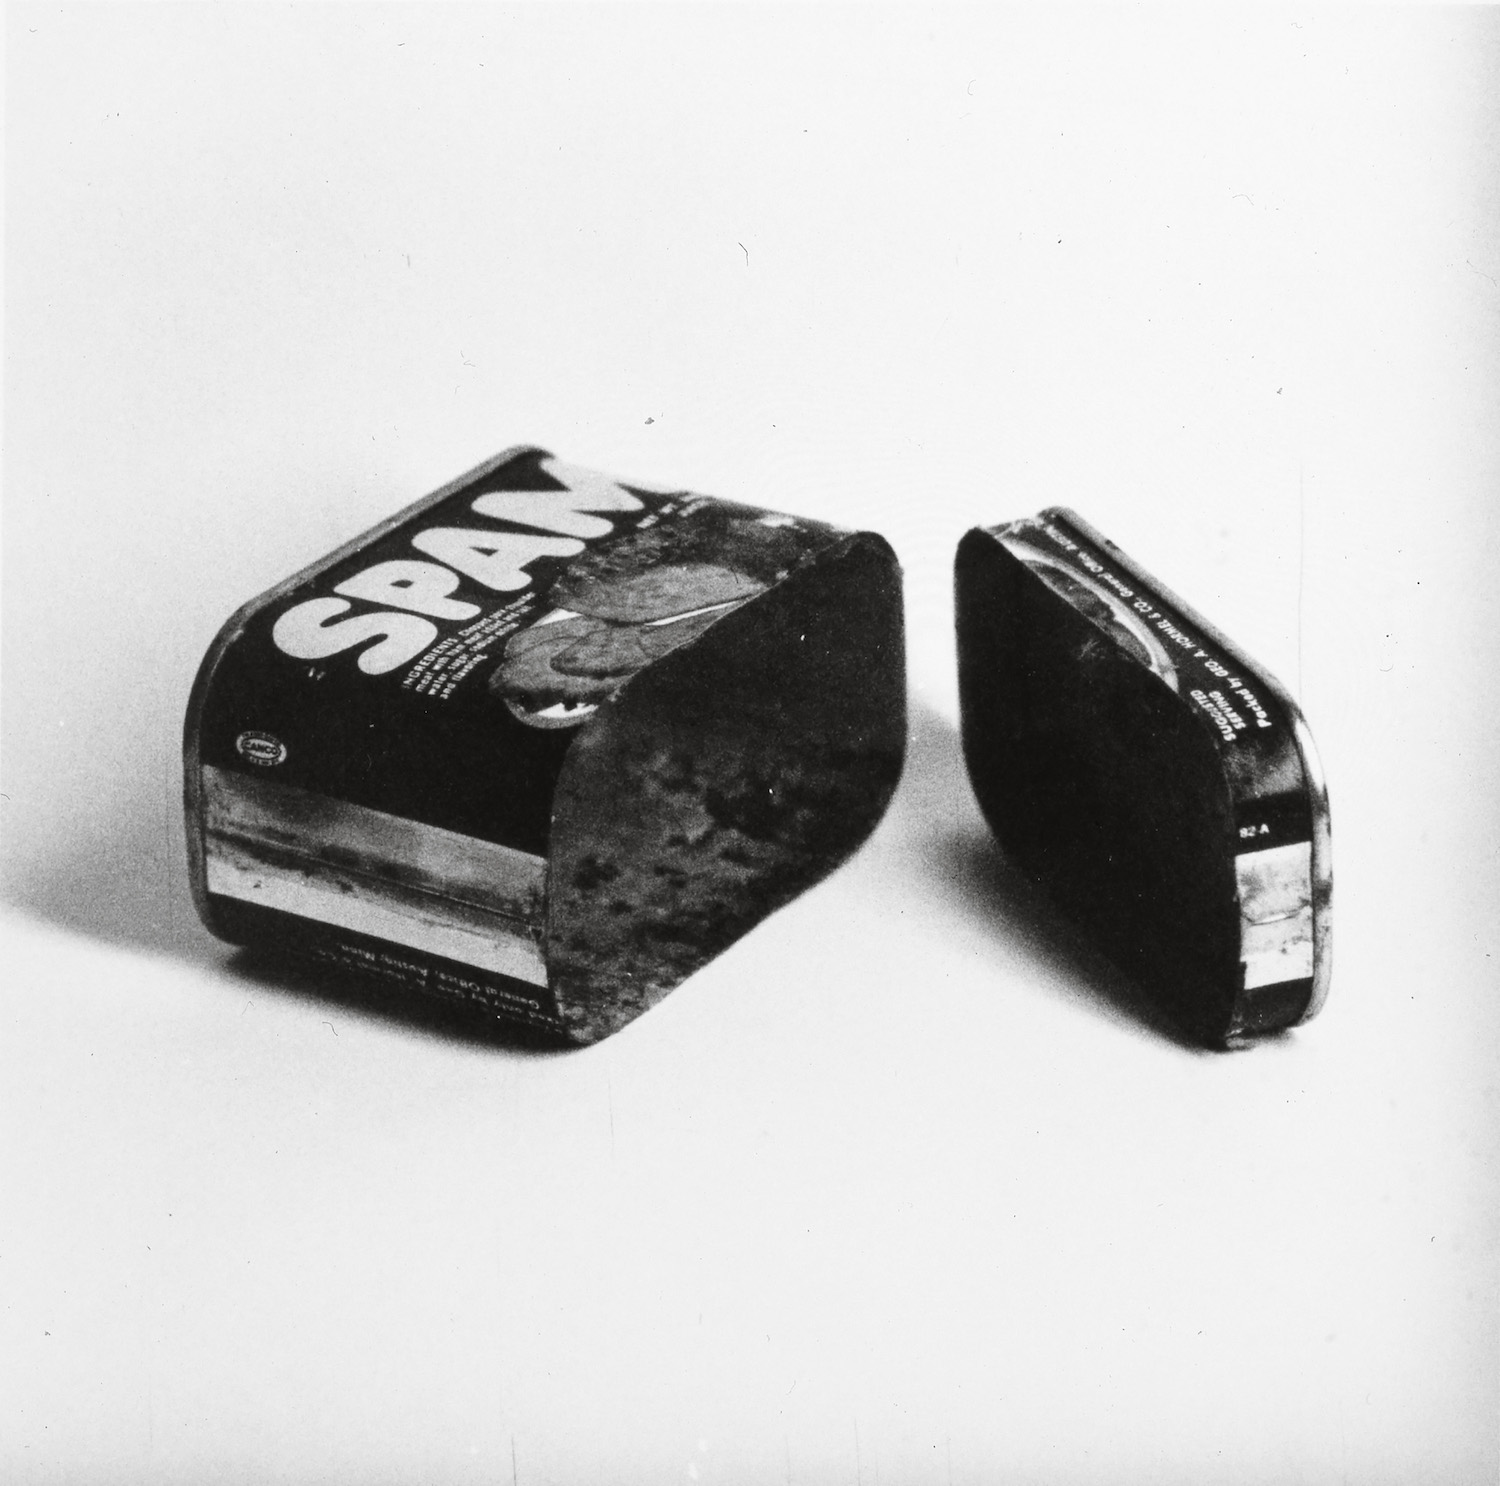 Ed Ruscha, Spam (Cut in Two), 1961. Courtesy the artist and Gagosian Gallery